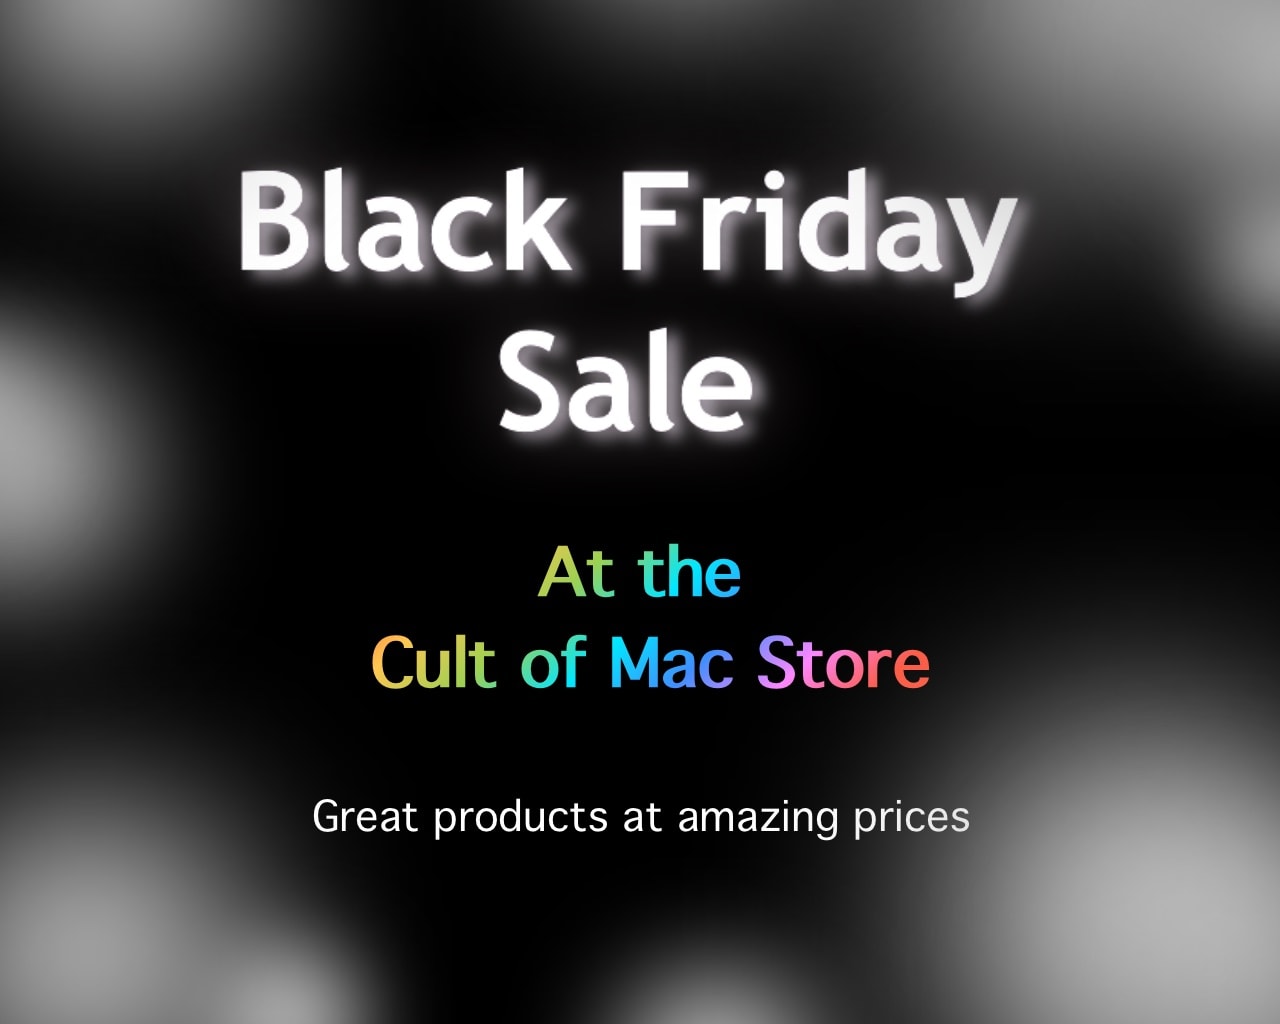 Black Friday has landed over at the Cult of Mac Store.